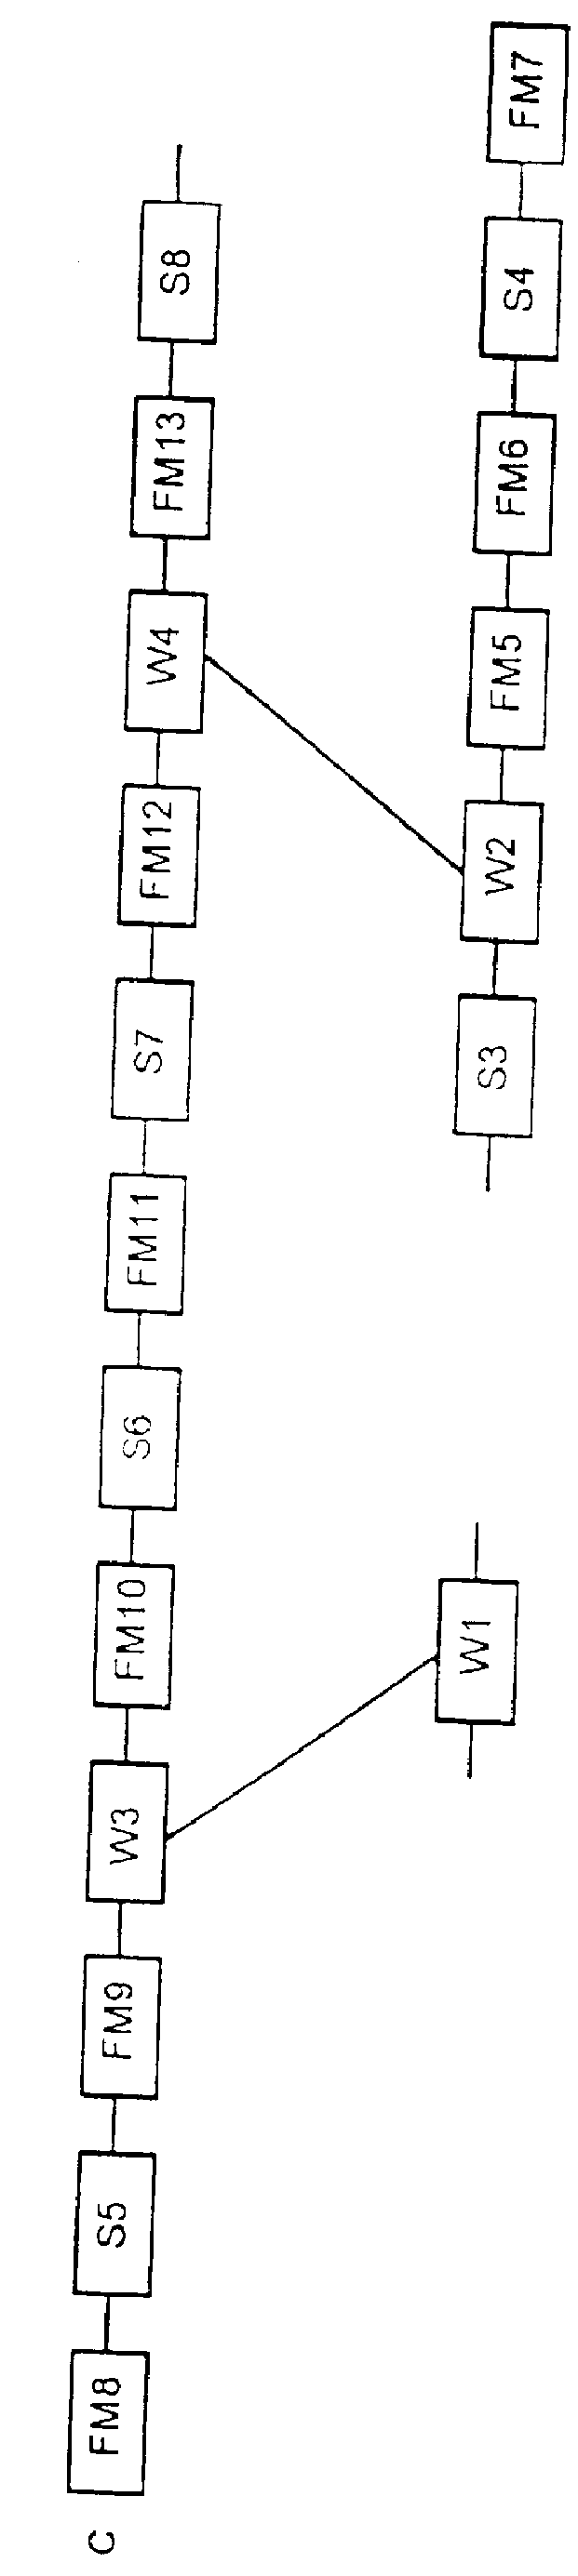 Process and device for control and monitoring a traffic control system